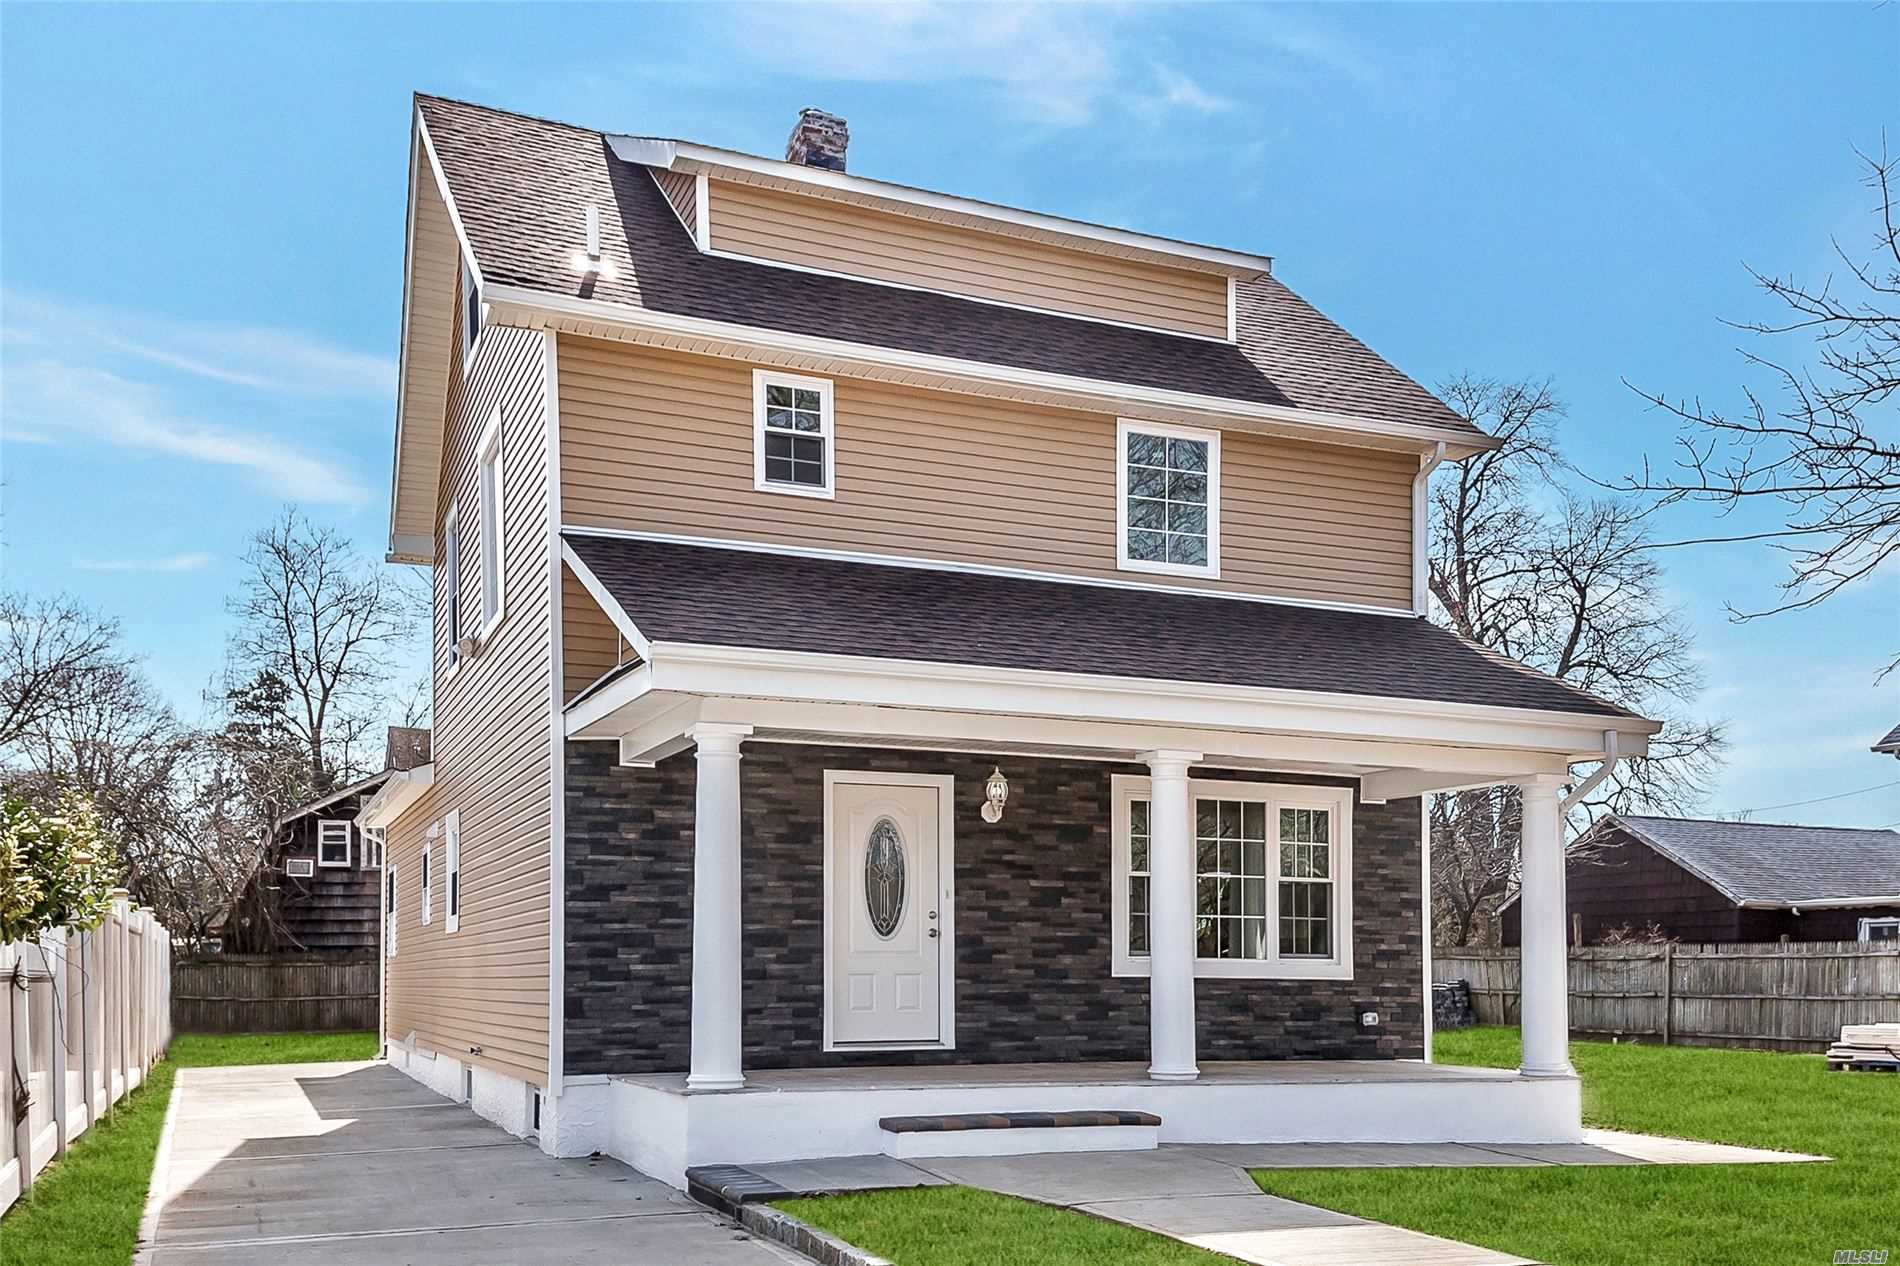 Totally Updated 5 Bedroom Colonial. 2 Full Baths. New Hard Wood Floors. New Plumbing. New Electric. Granite Counter Top. New Cabinets. New Bathrooms. Large Walk Up Attic. 40x125 Lot. Long Driveway. Finished Basement. Close To Transportation And All.